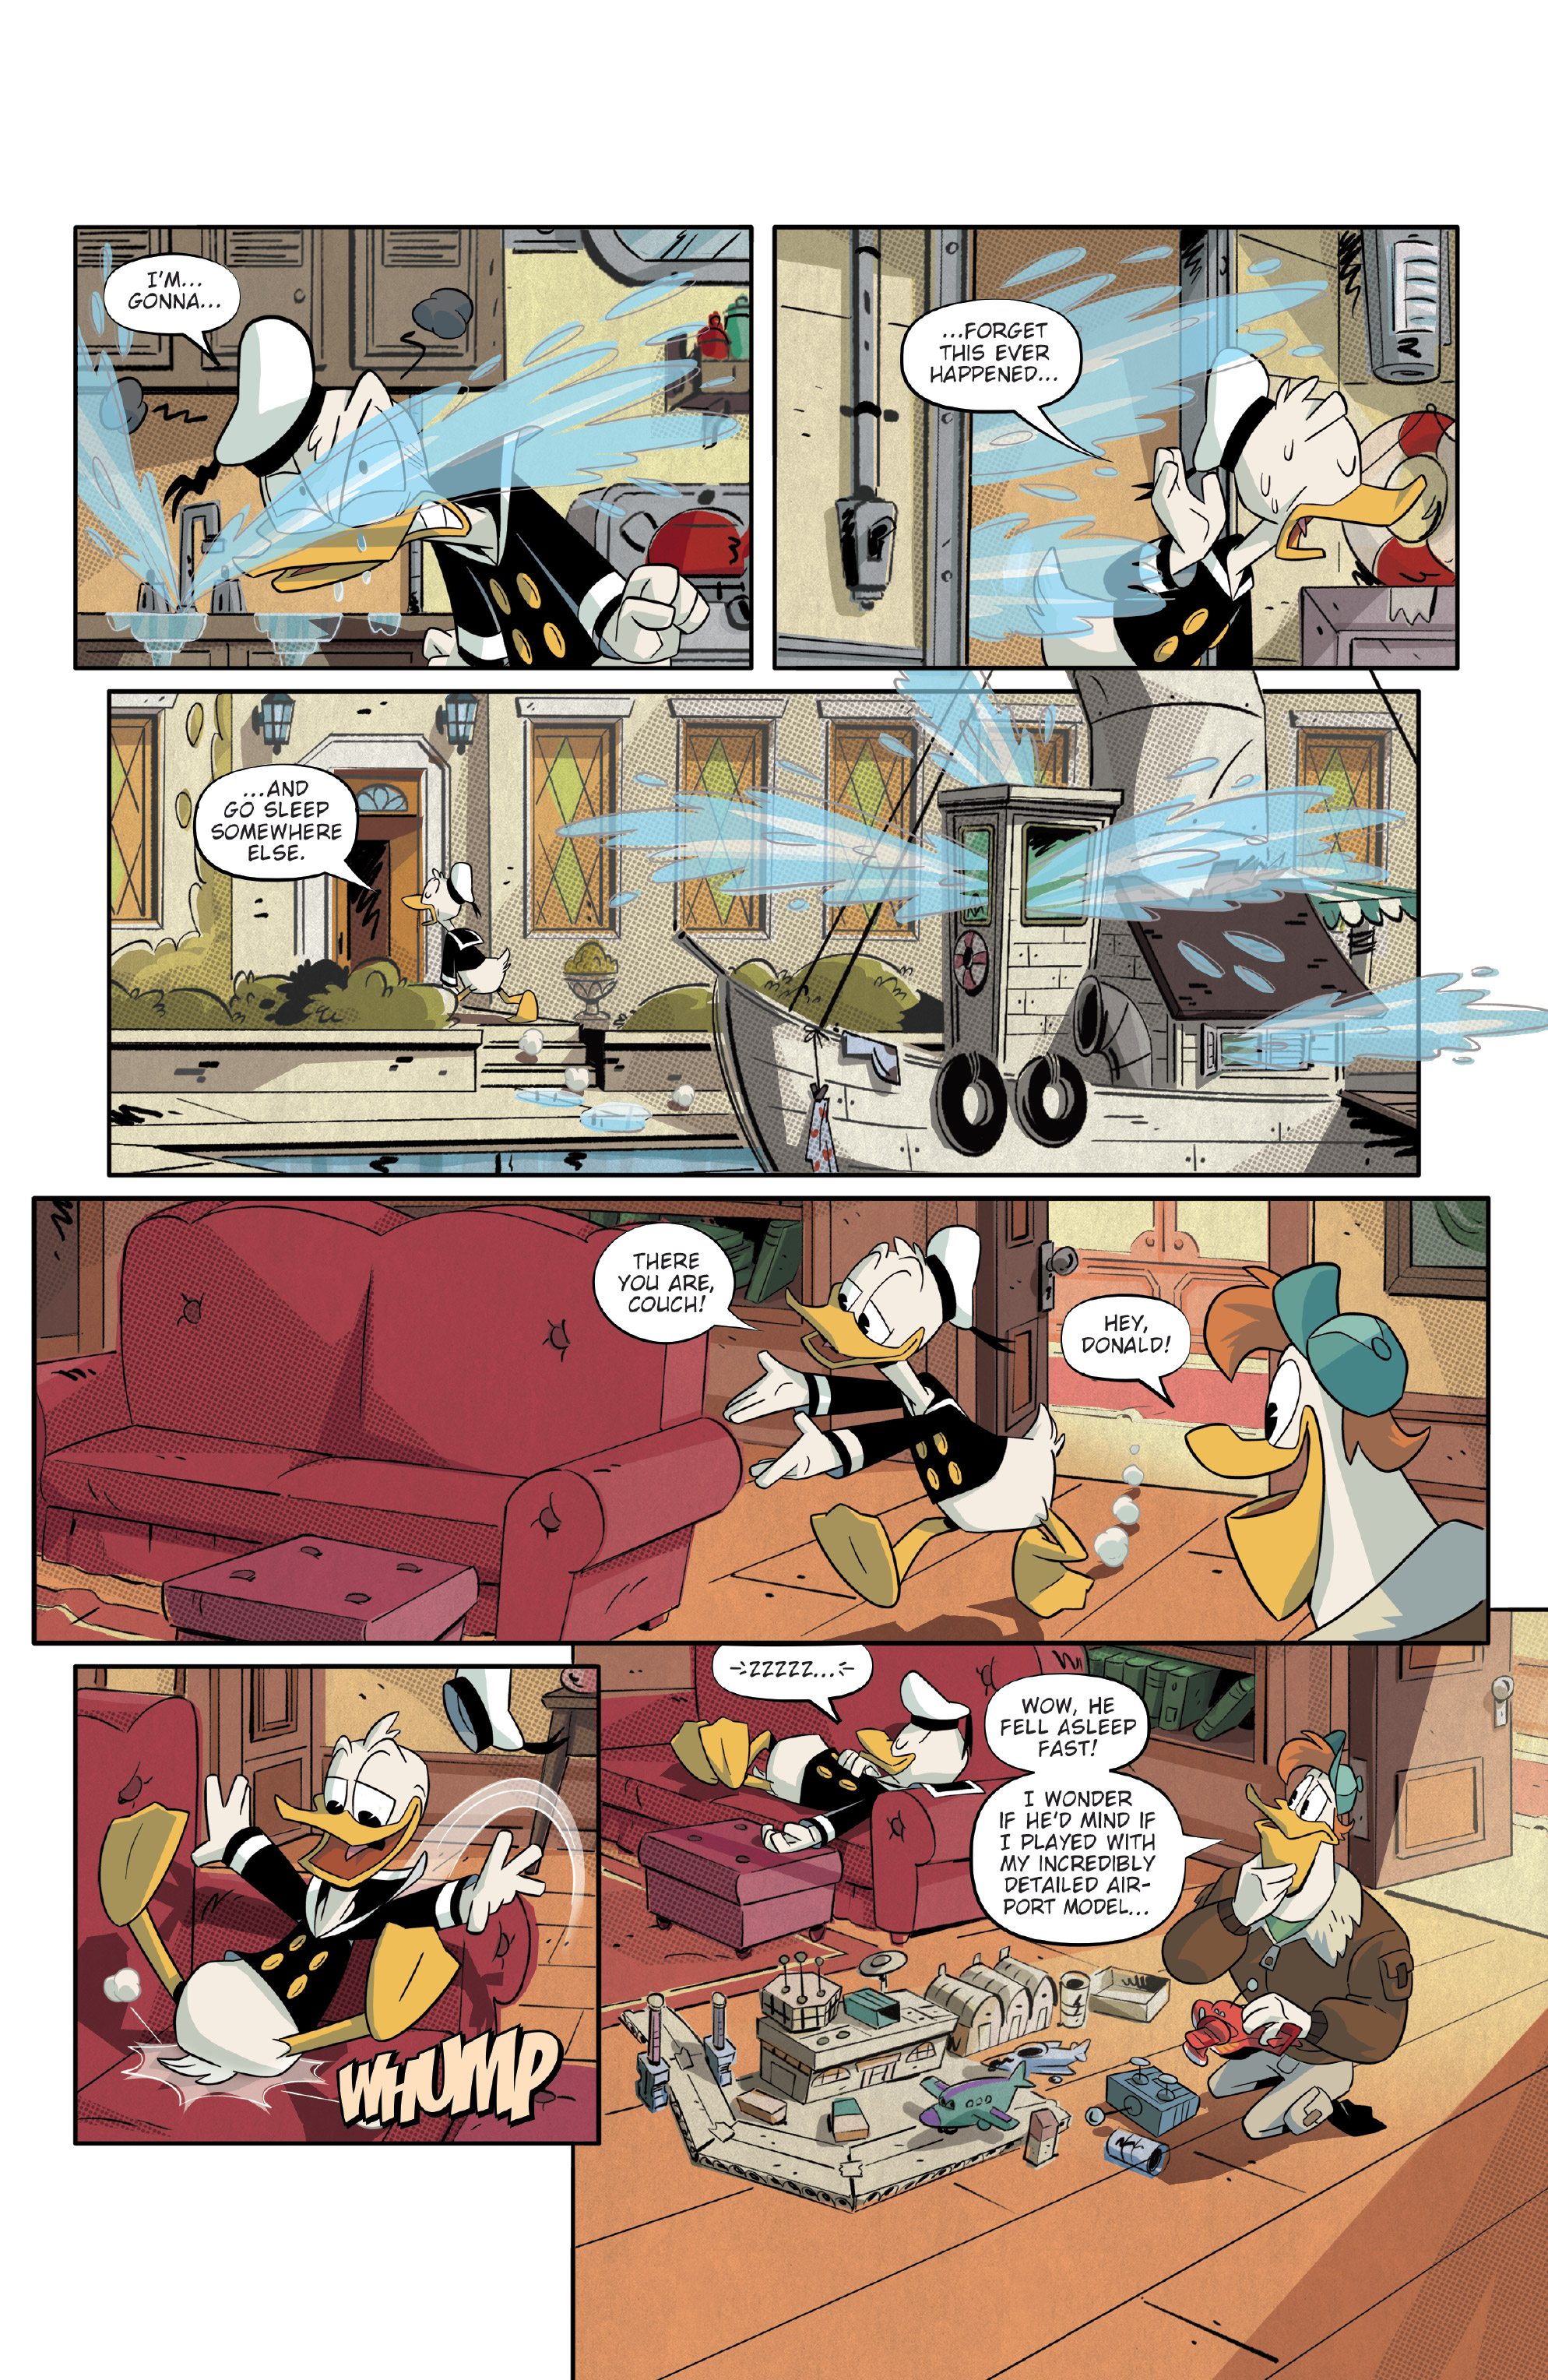 DuckTales: Silence & Science (2019-): Chapter 1 - Page 5